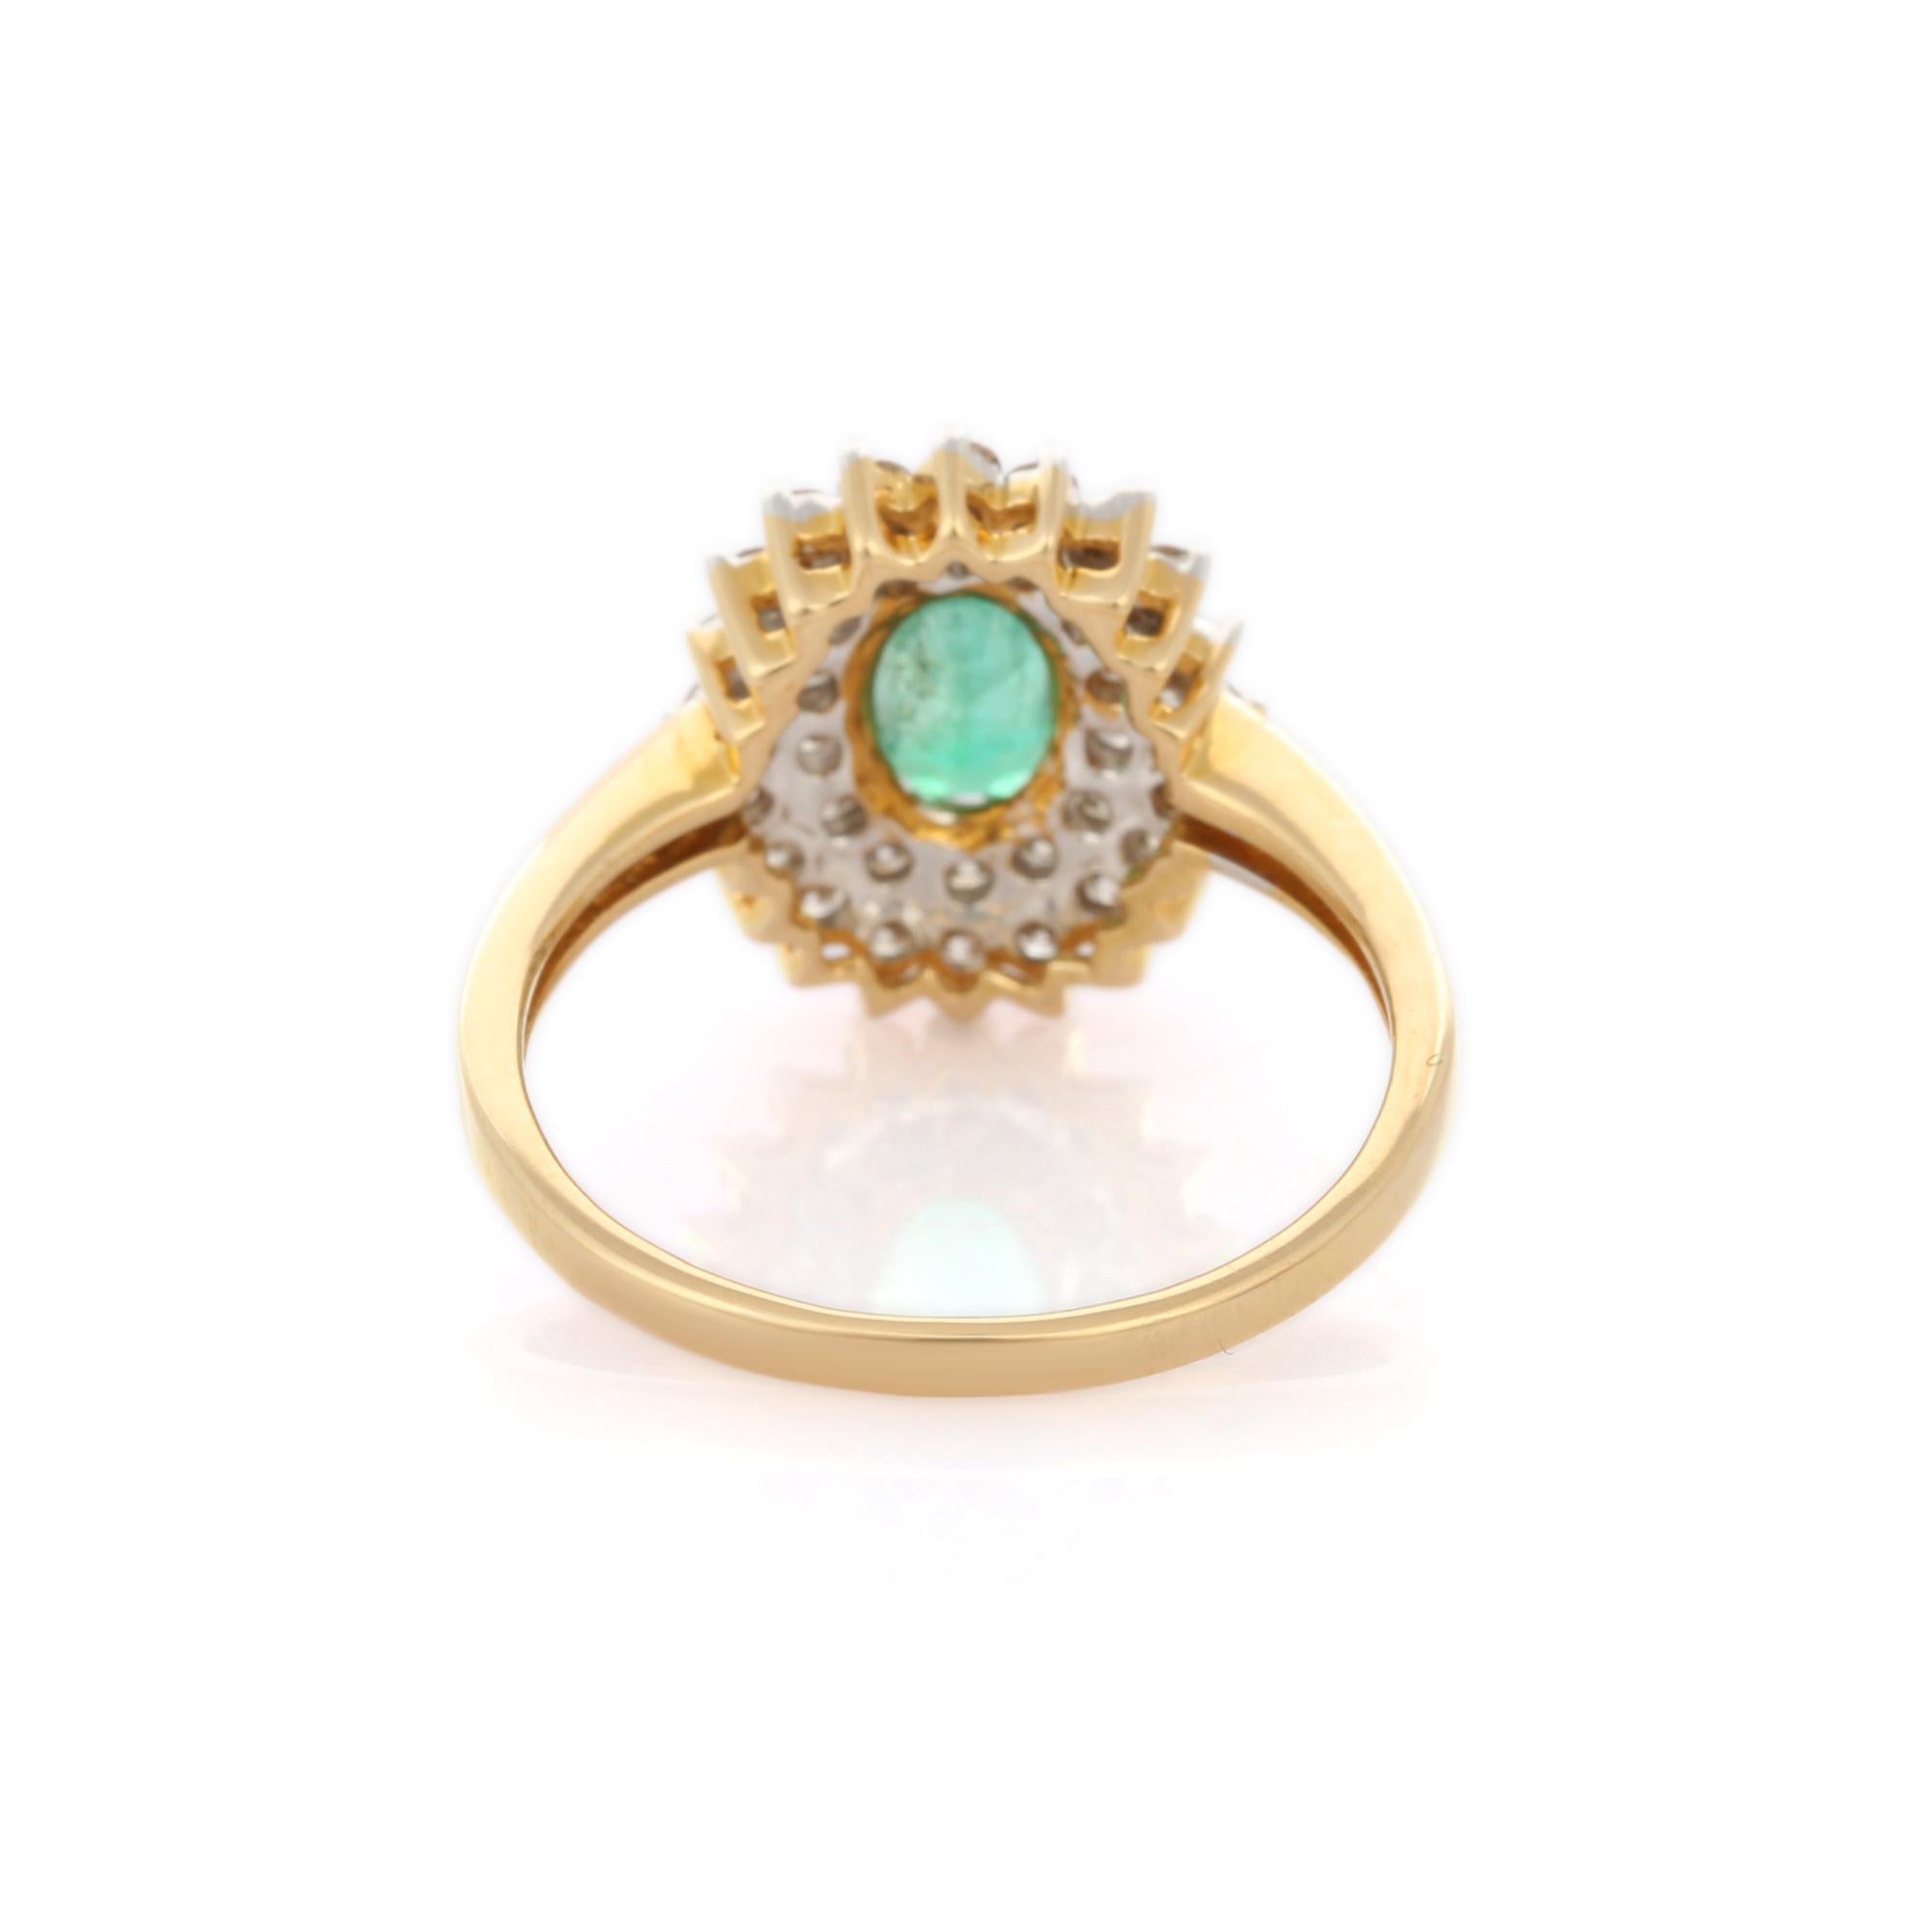 For Sale:  Exquisite 18K Yellow Gold Emerald Halo Diamond Engagement Wedding Ring for Her 4